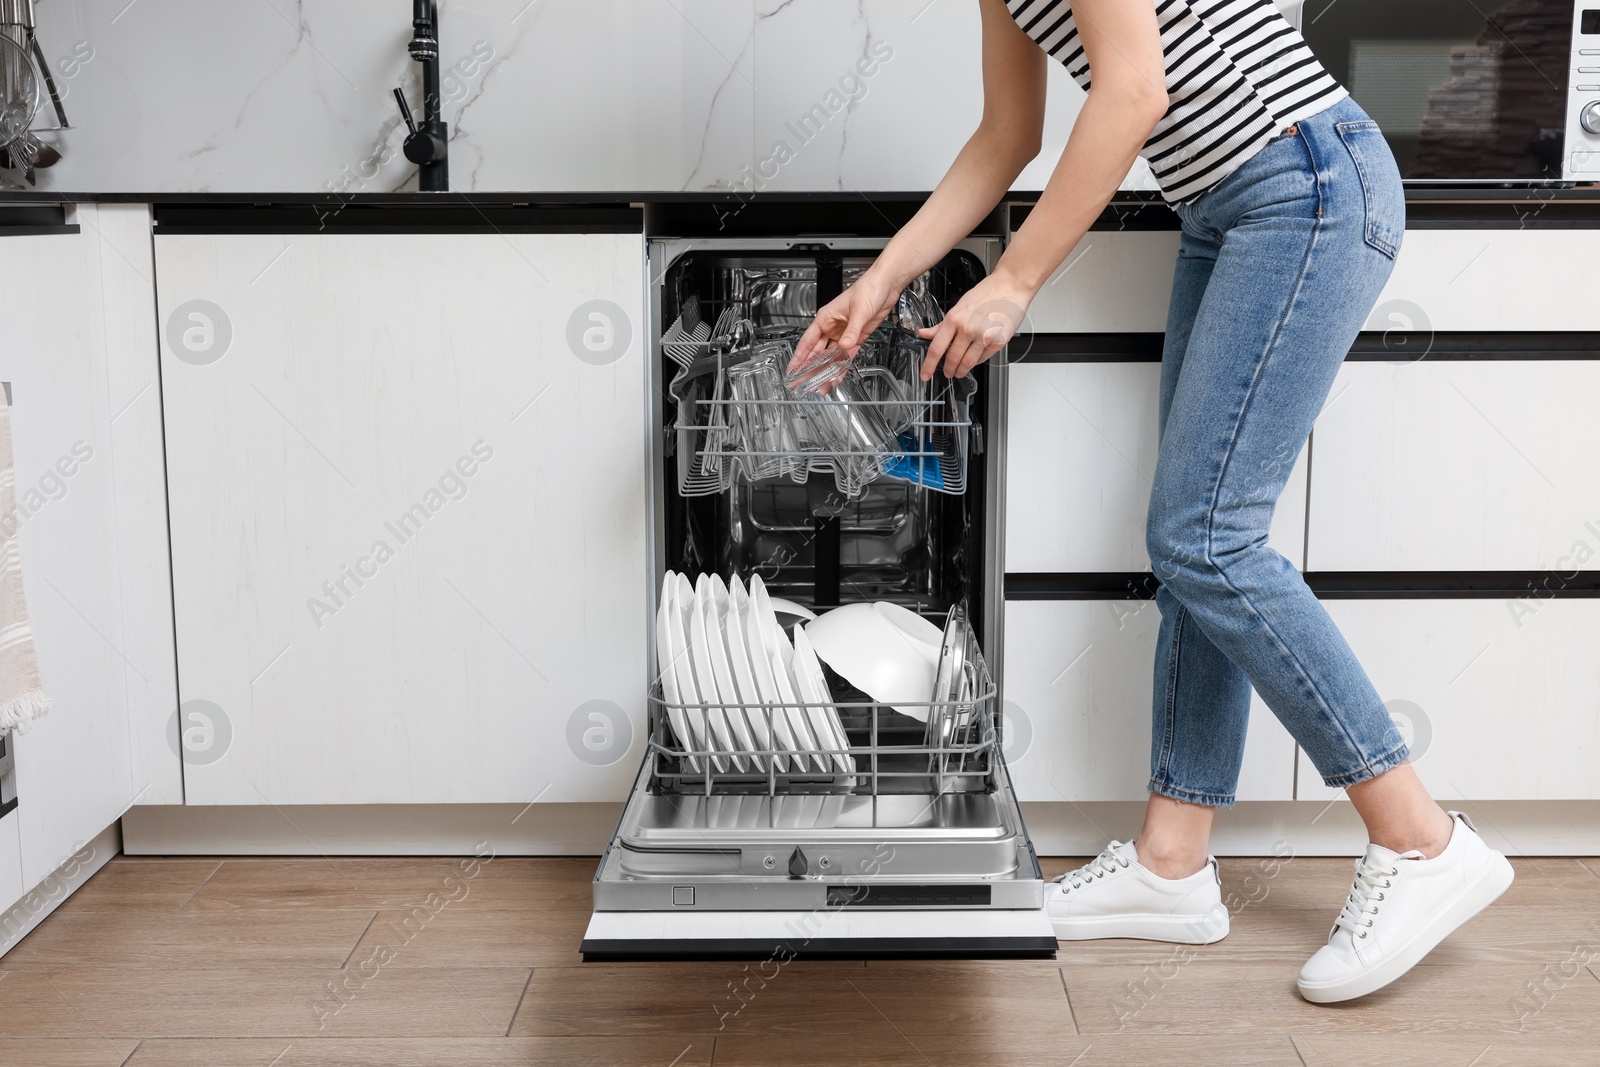 Photo of Woman loading dishwasher with glasses and plates in kitchen, closeup